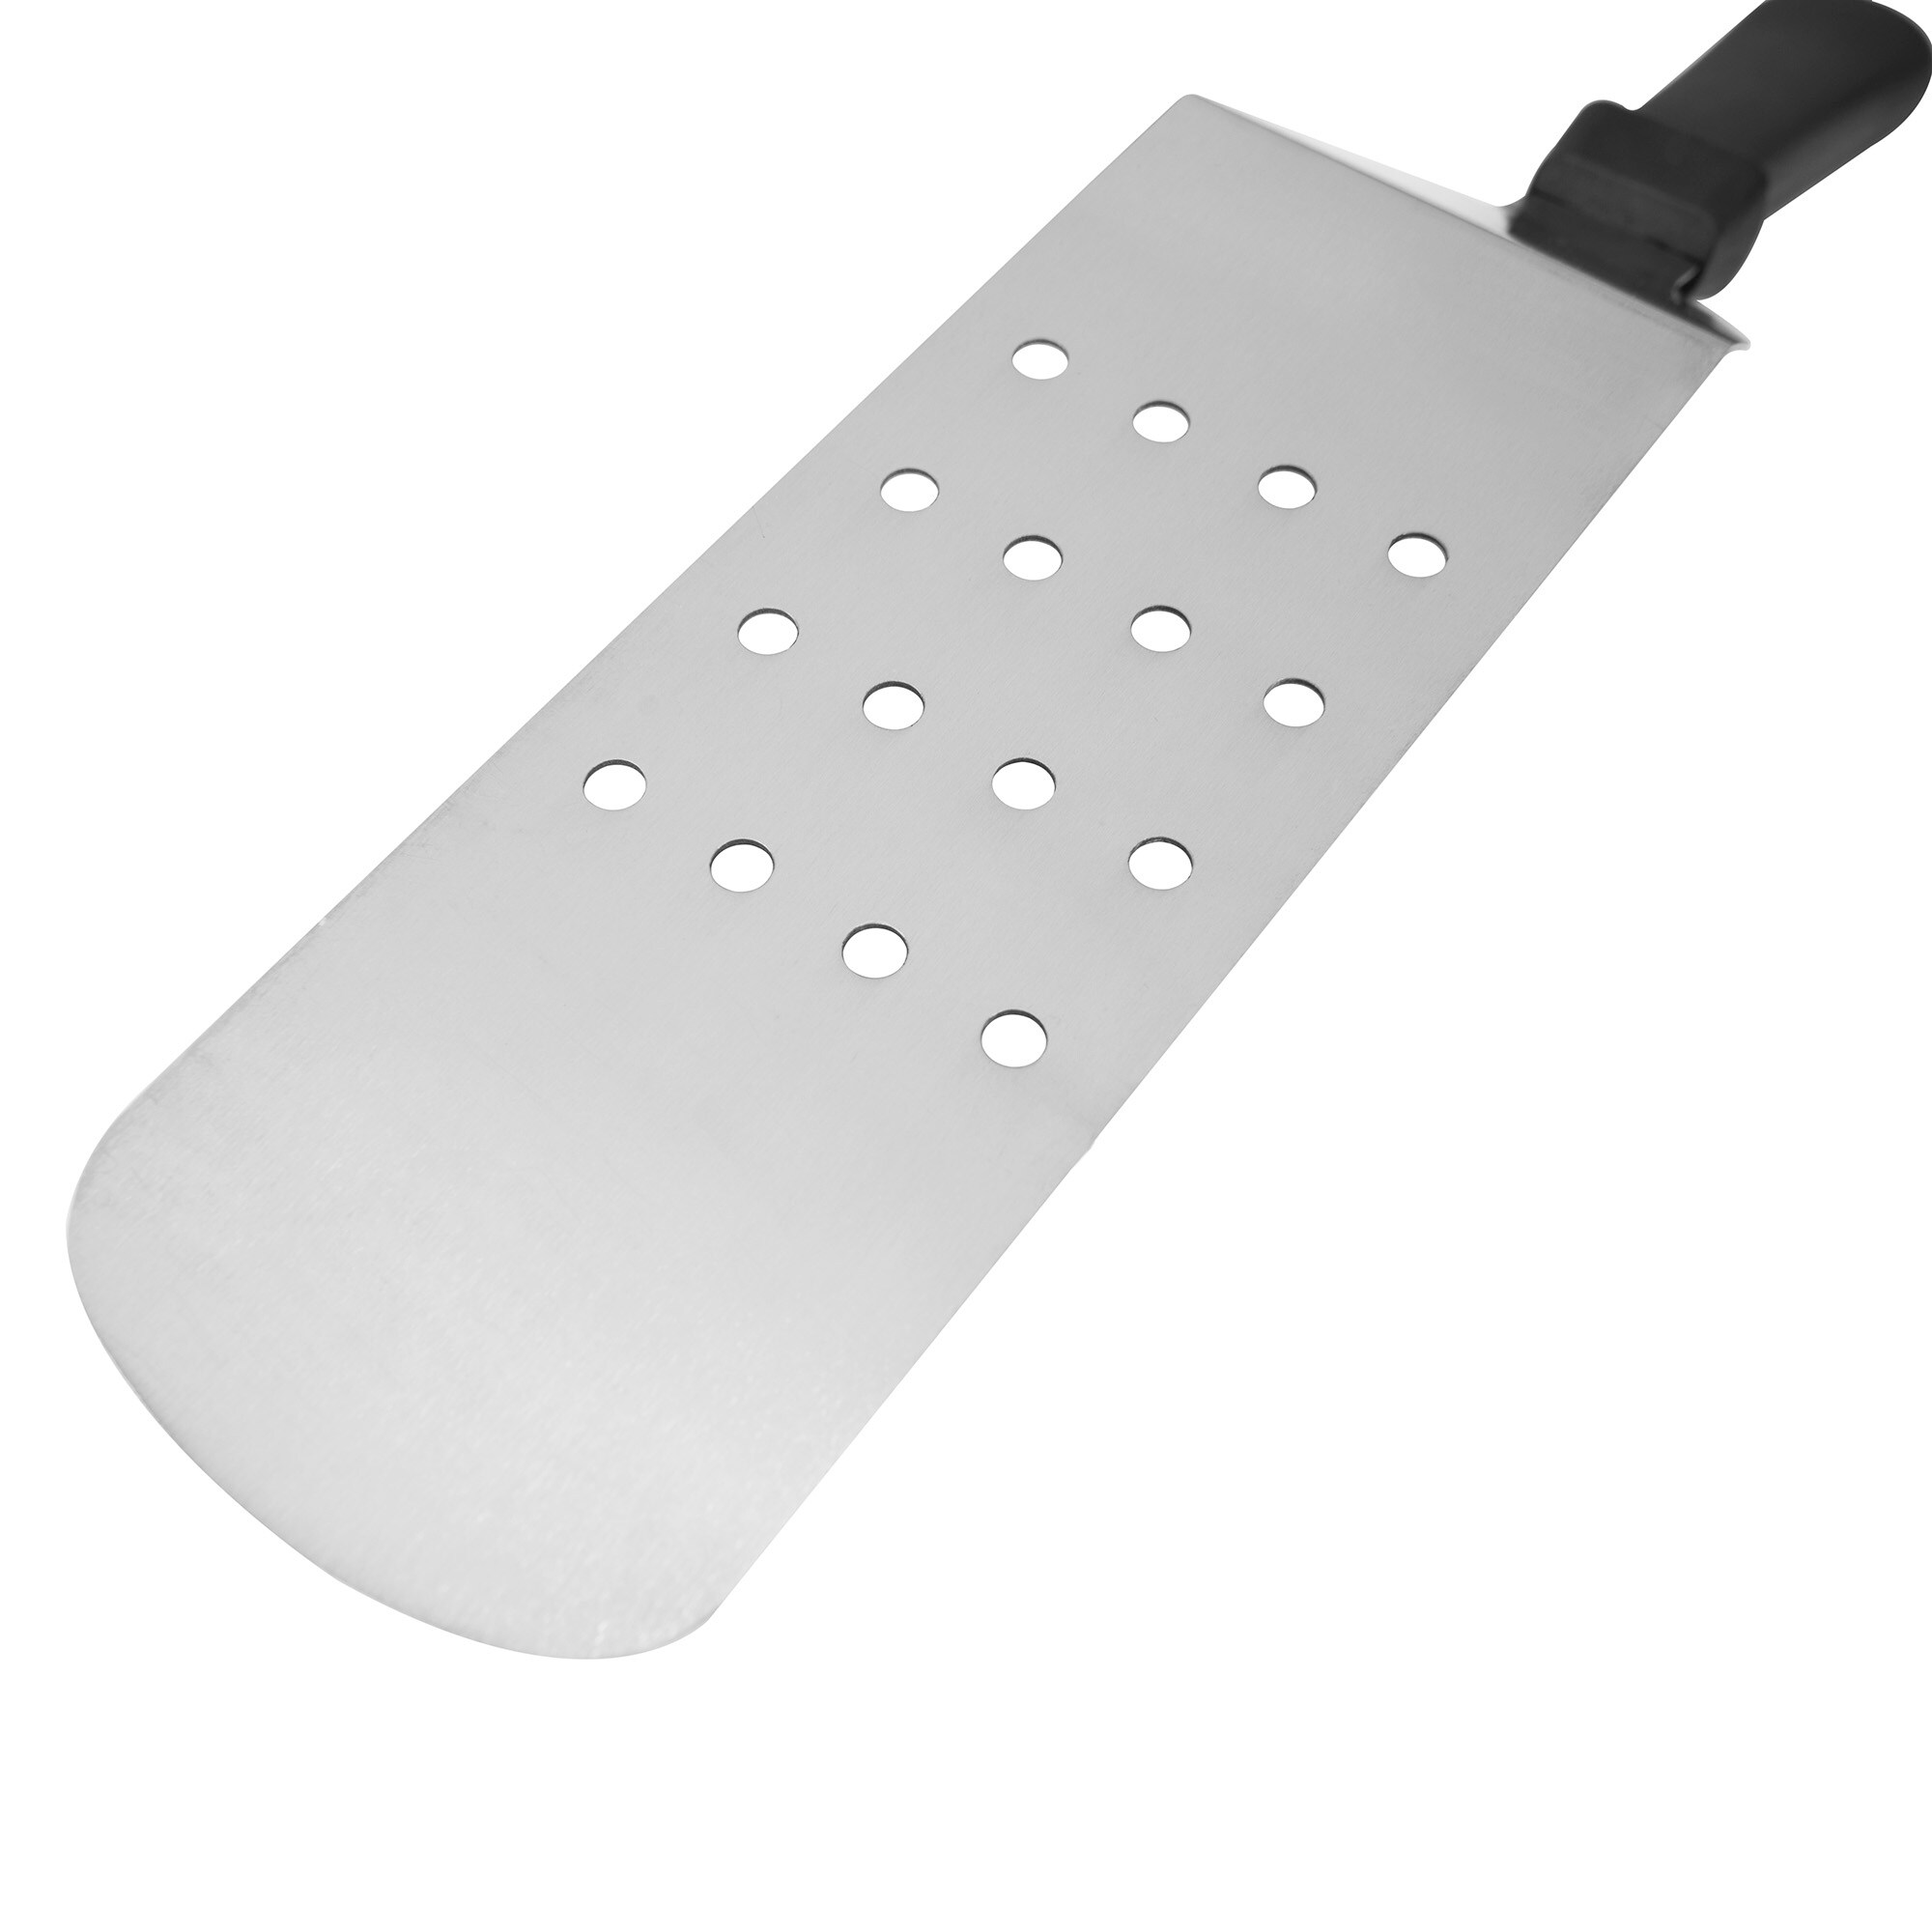 Royal Gourmet Stainless Steel Spatula Set Scraper/Chopper, Spatula,  Perforated Turner, 2 Squirt Bottles (5-Pieces) TF0505 - The Home Depot